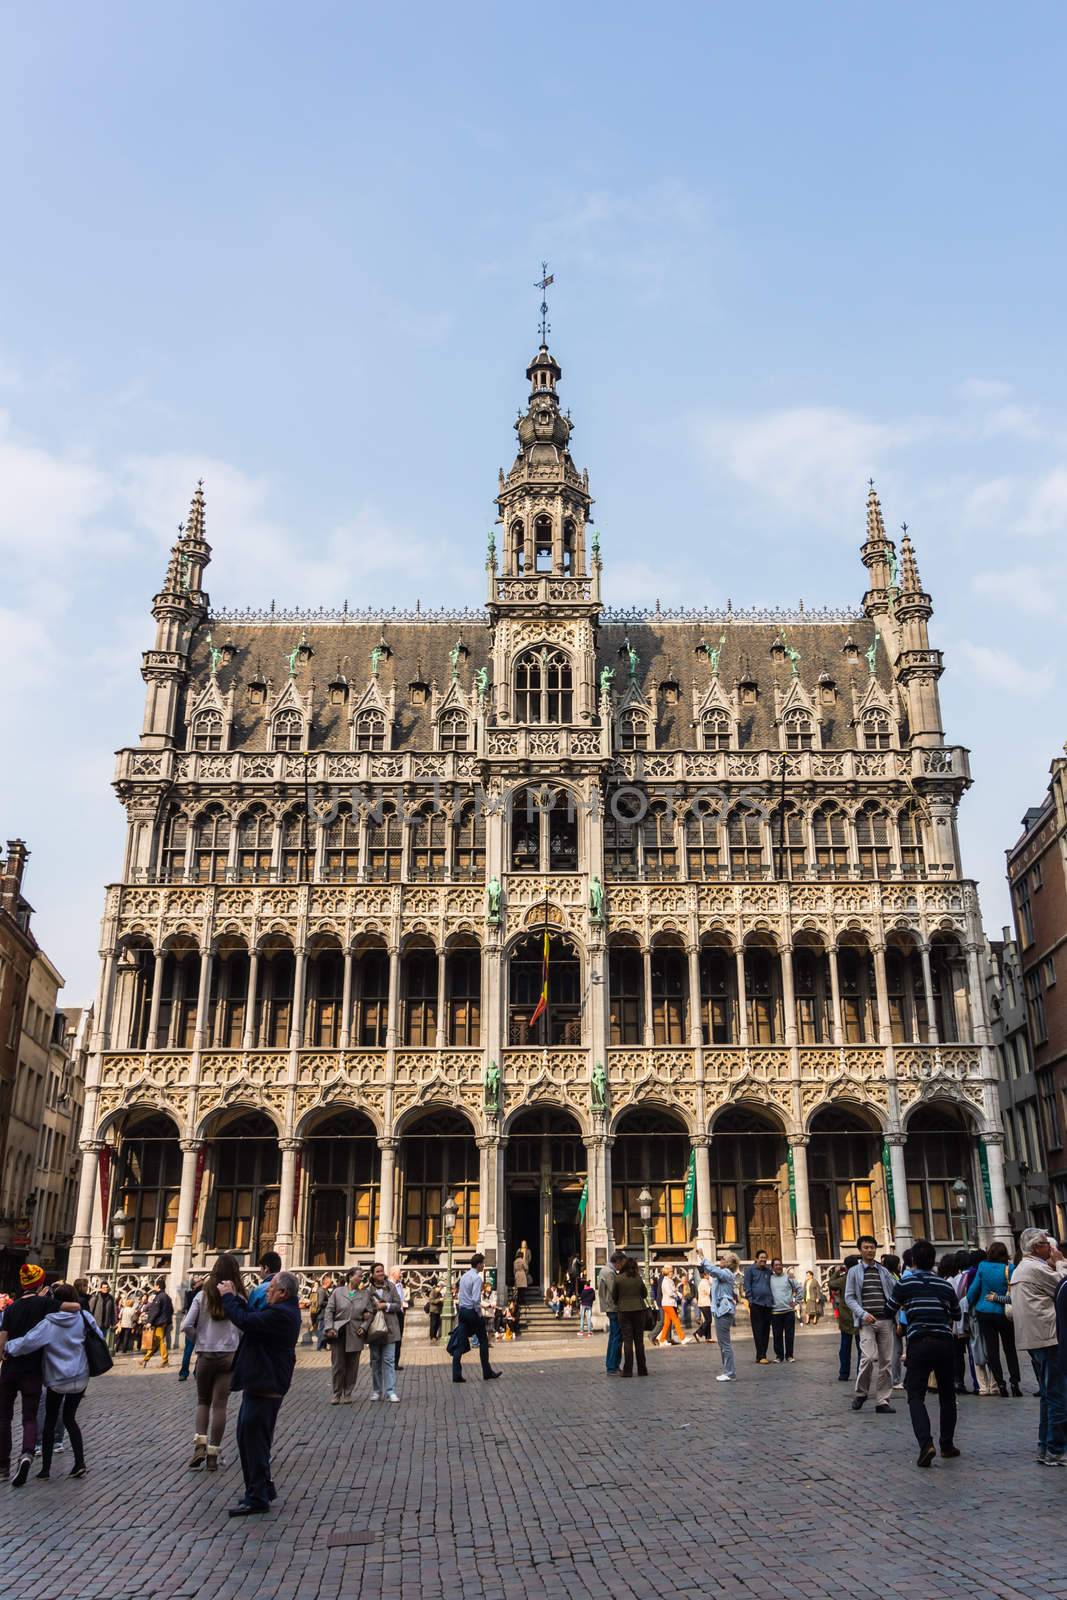 King's House on the Grand Place in Brussels on May 02, 2013. The Grand Place is UNESCO World Heritage Site and main attraction of the city, full of tourists 24 hours a day.